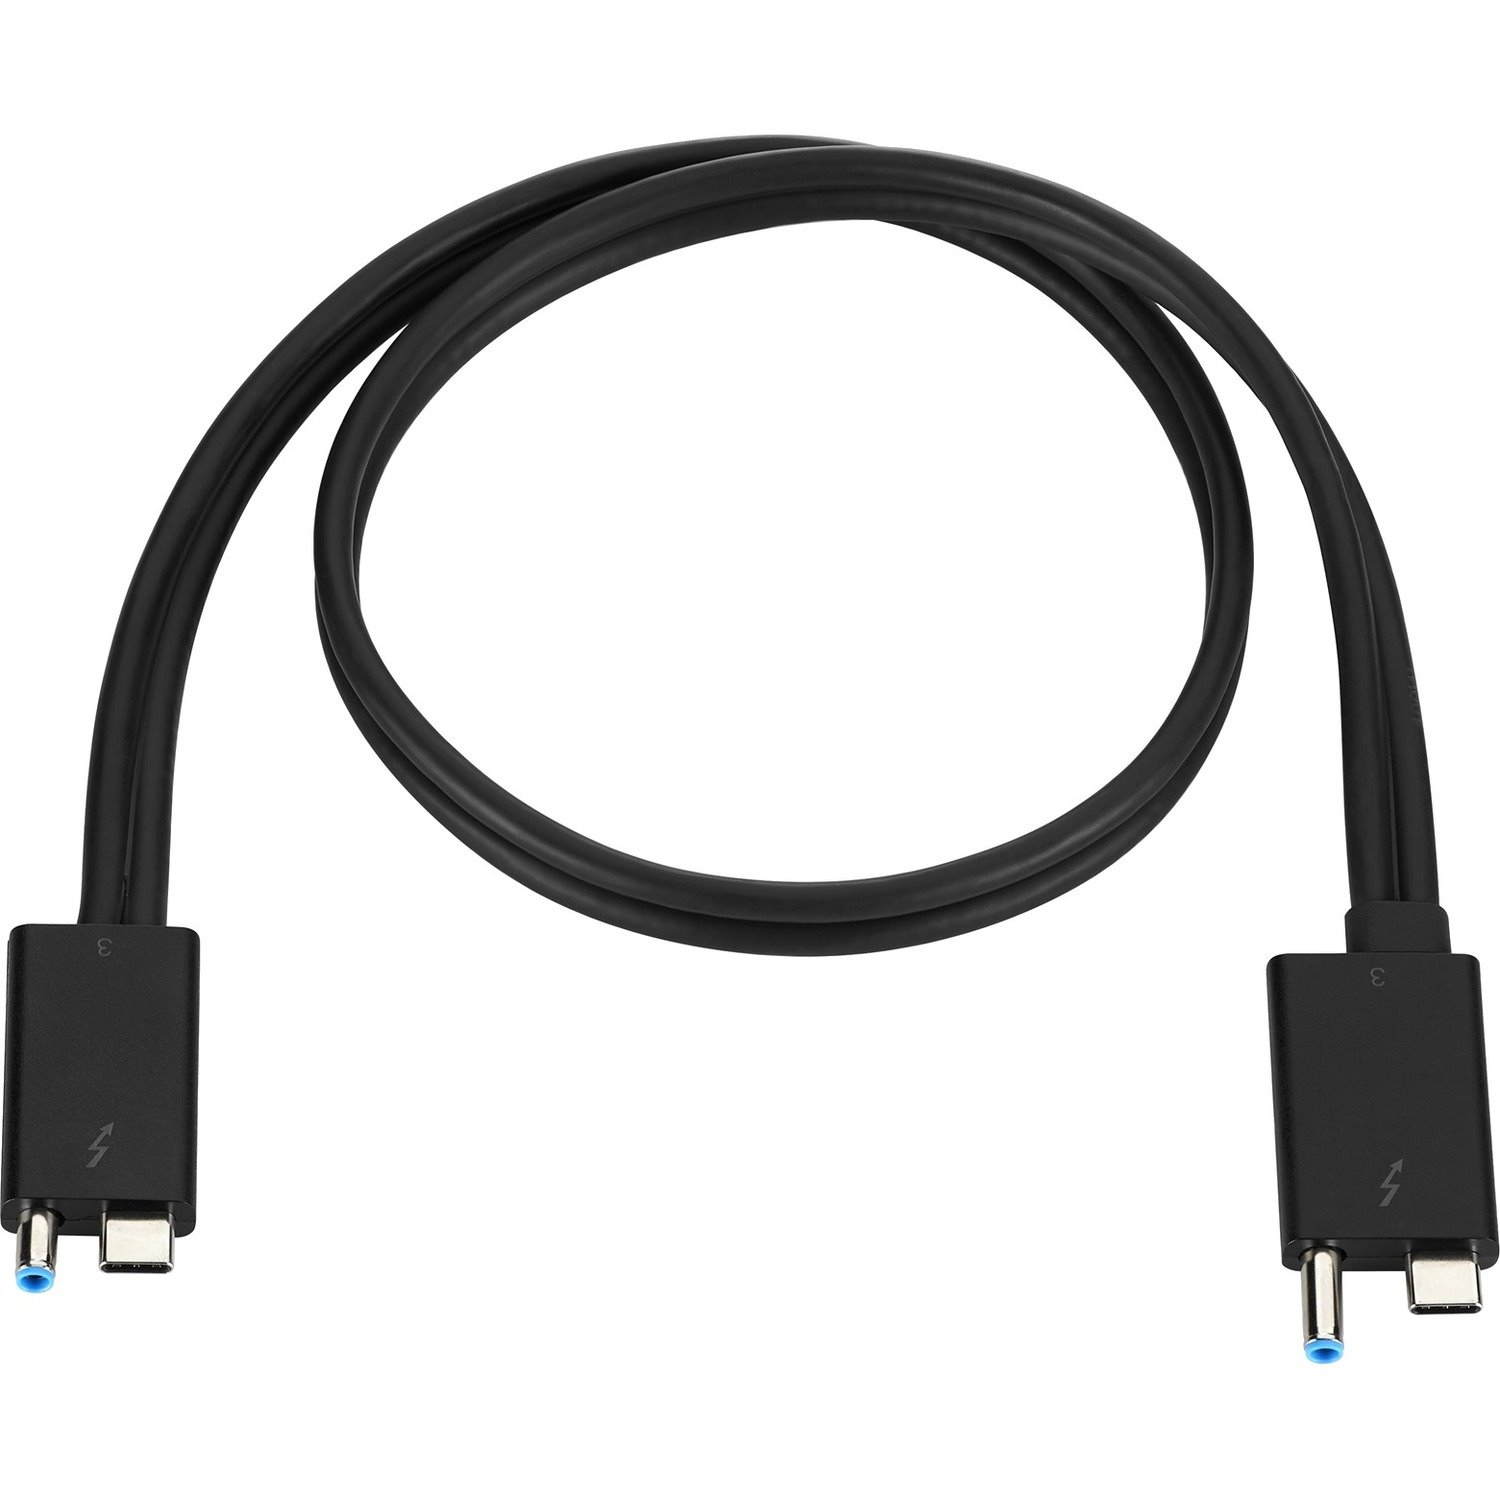 HP 70 cm Power/Thunderbolt A/V/Power/Data Transfer Cable for Audio/Video Device, Docking Station